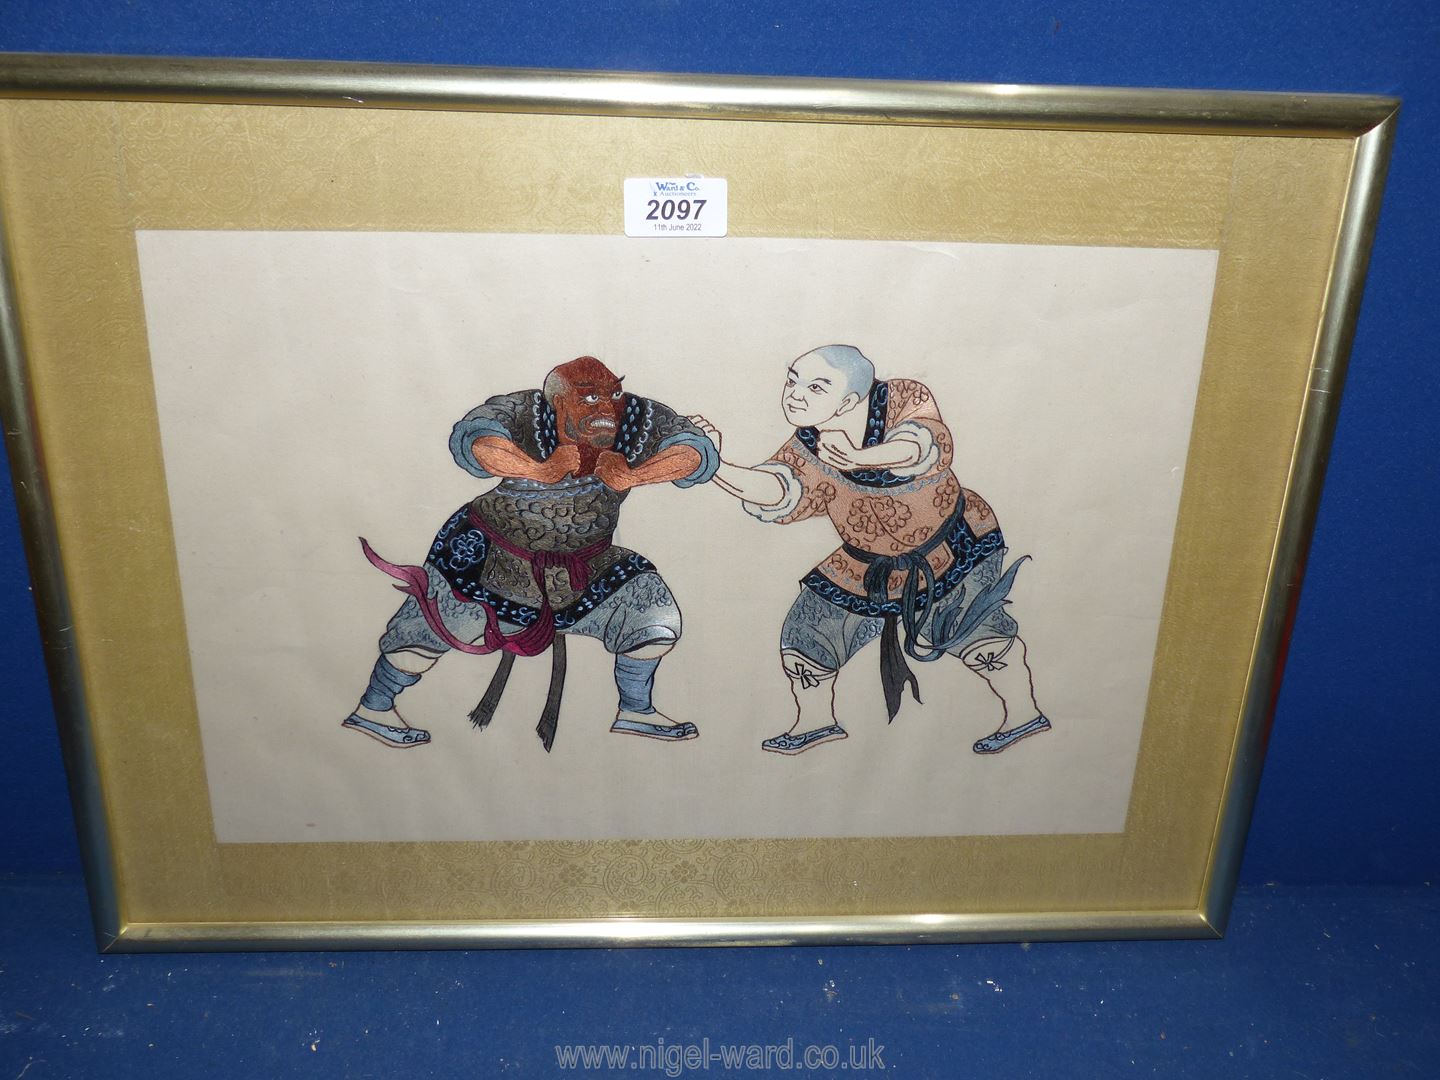 An Oriental embroidery of wrestlers.